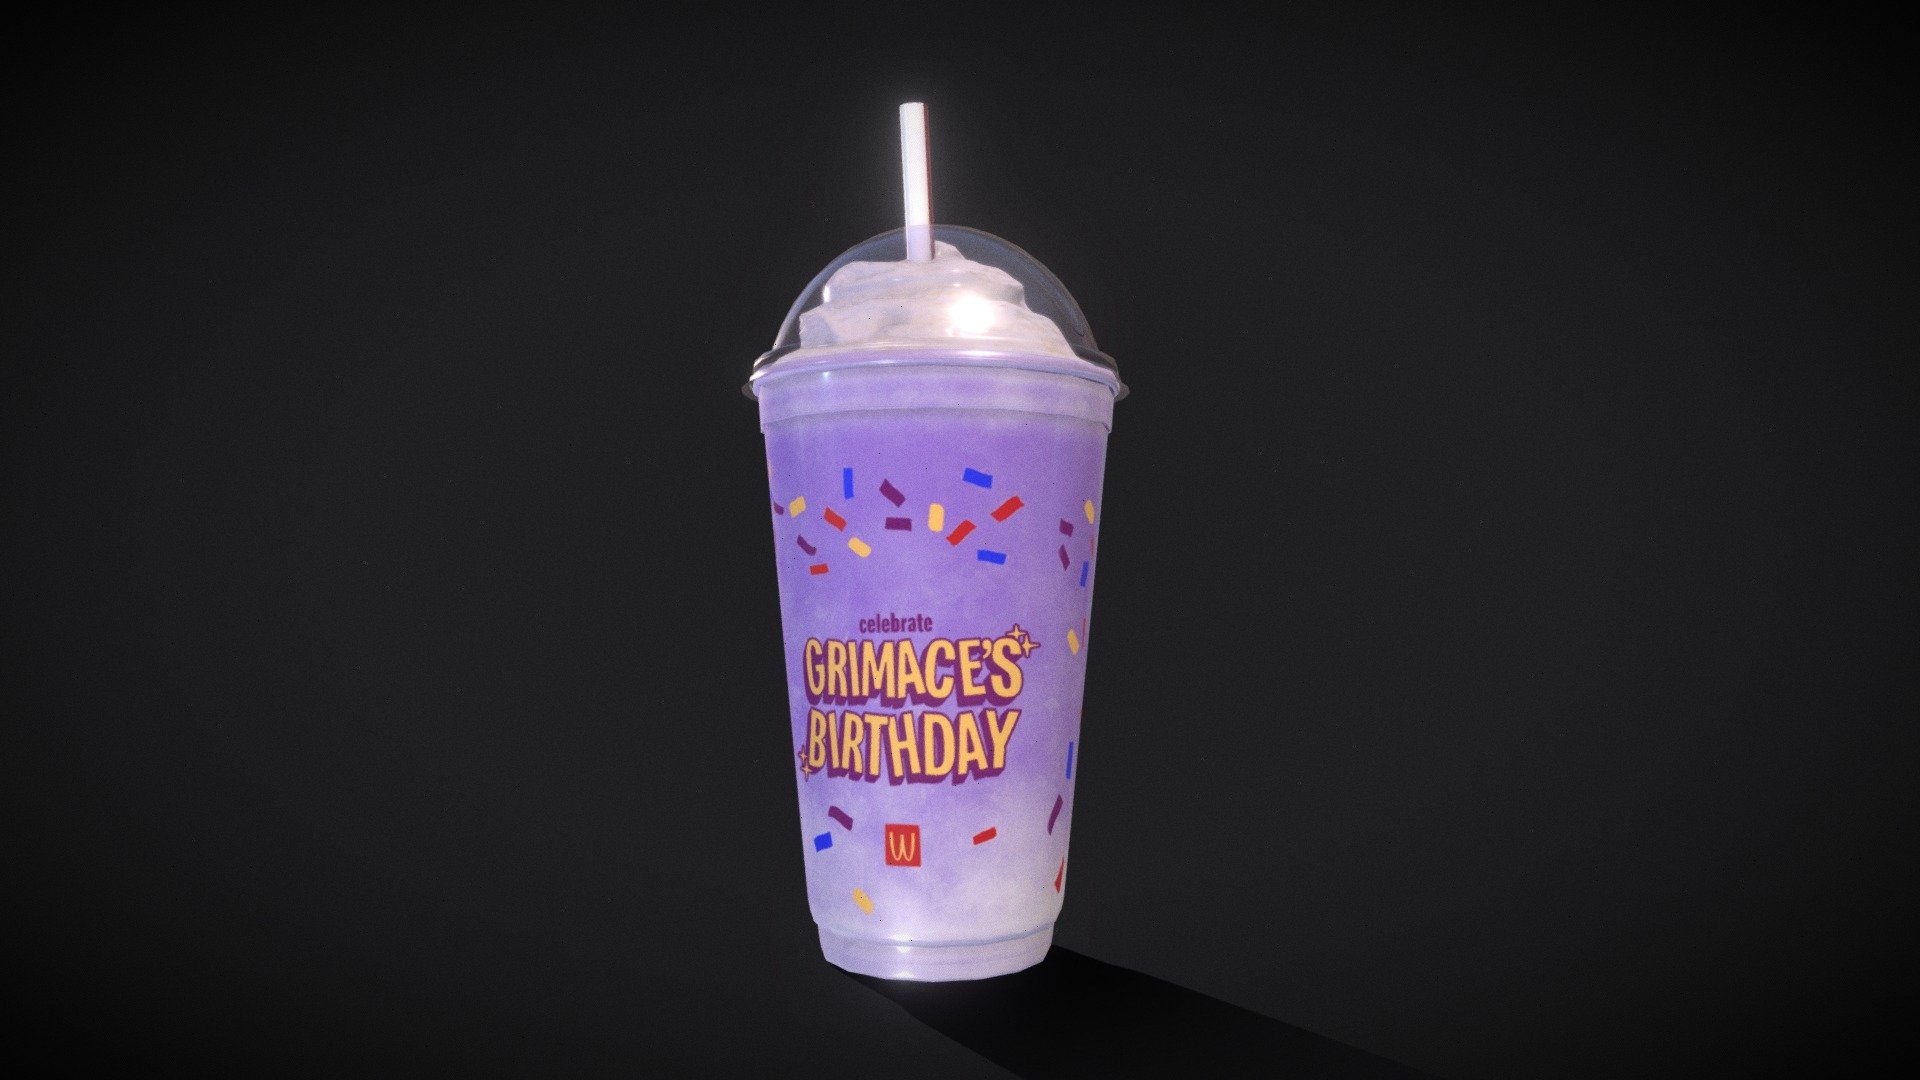 Parody WacDonalds Grimace Birthday Shake.

For personal use, social media, VRChat and streaming.

Grimace and original marks are property of McDonalds of whom I do not represent in any way 3d model